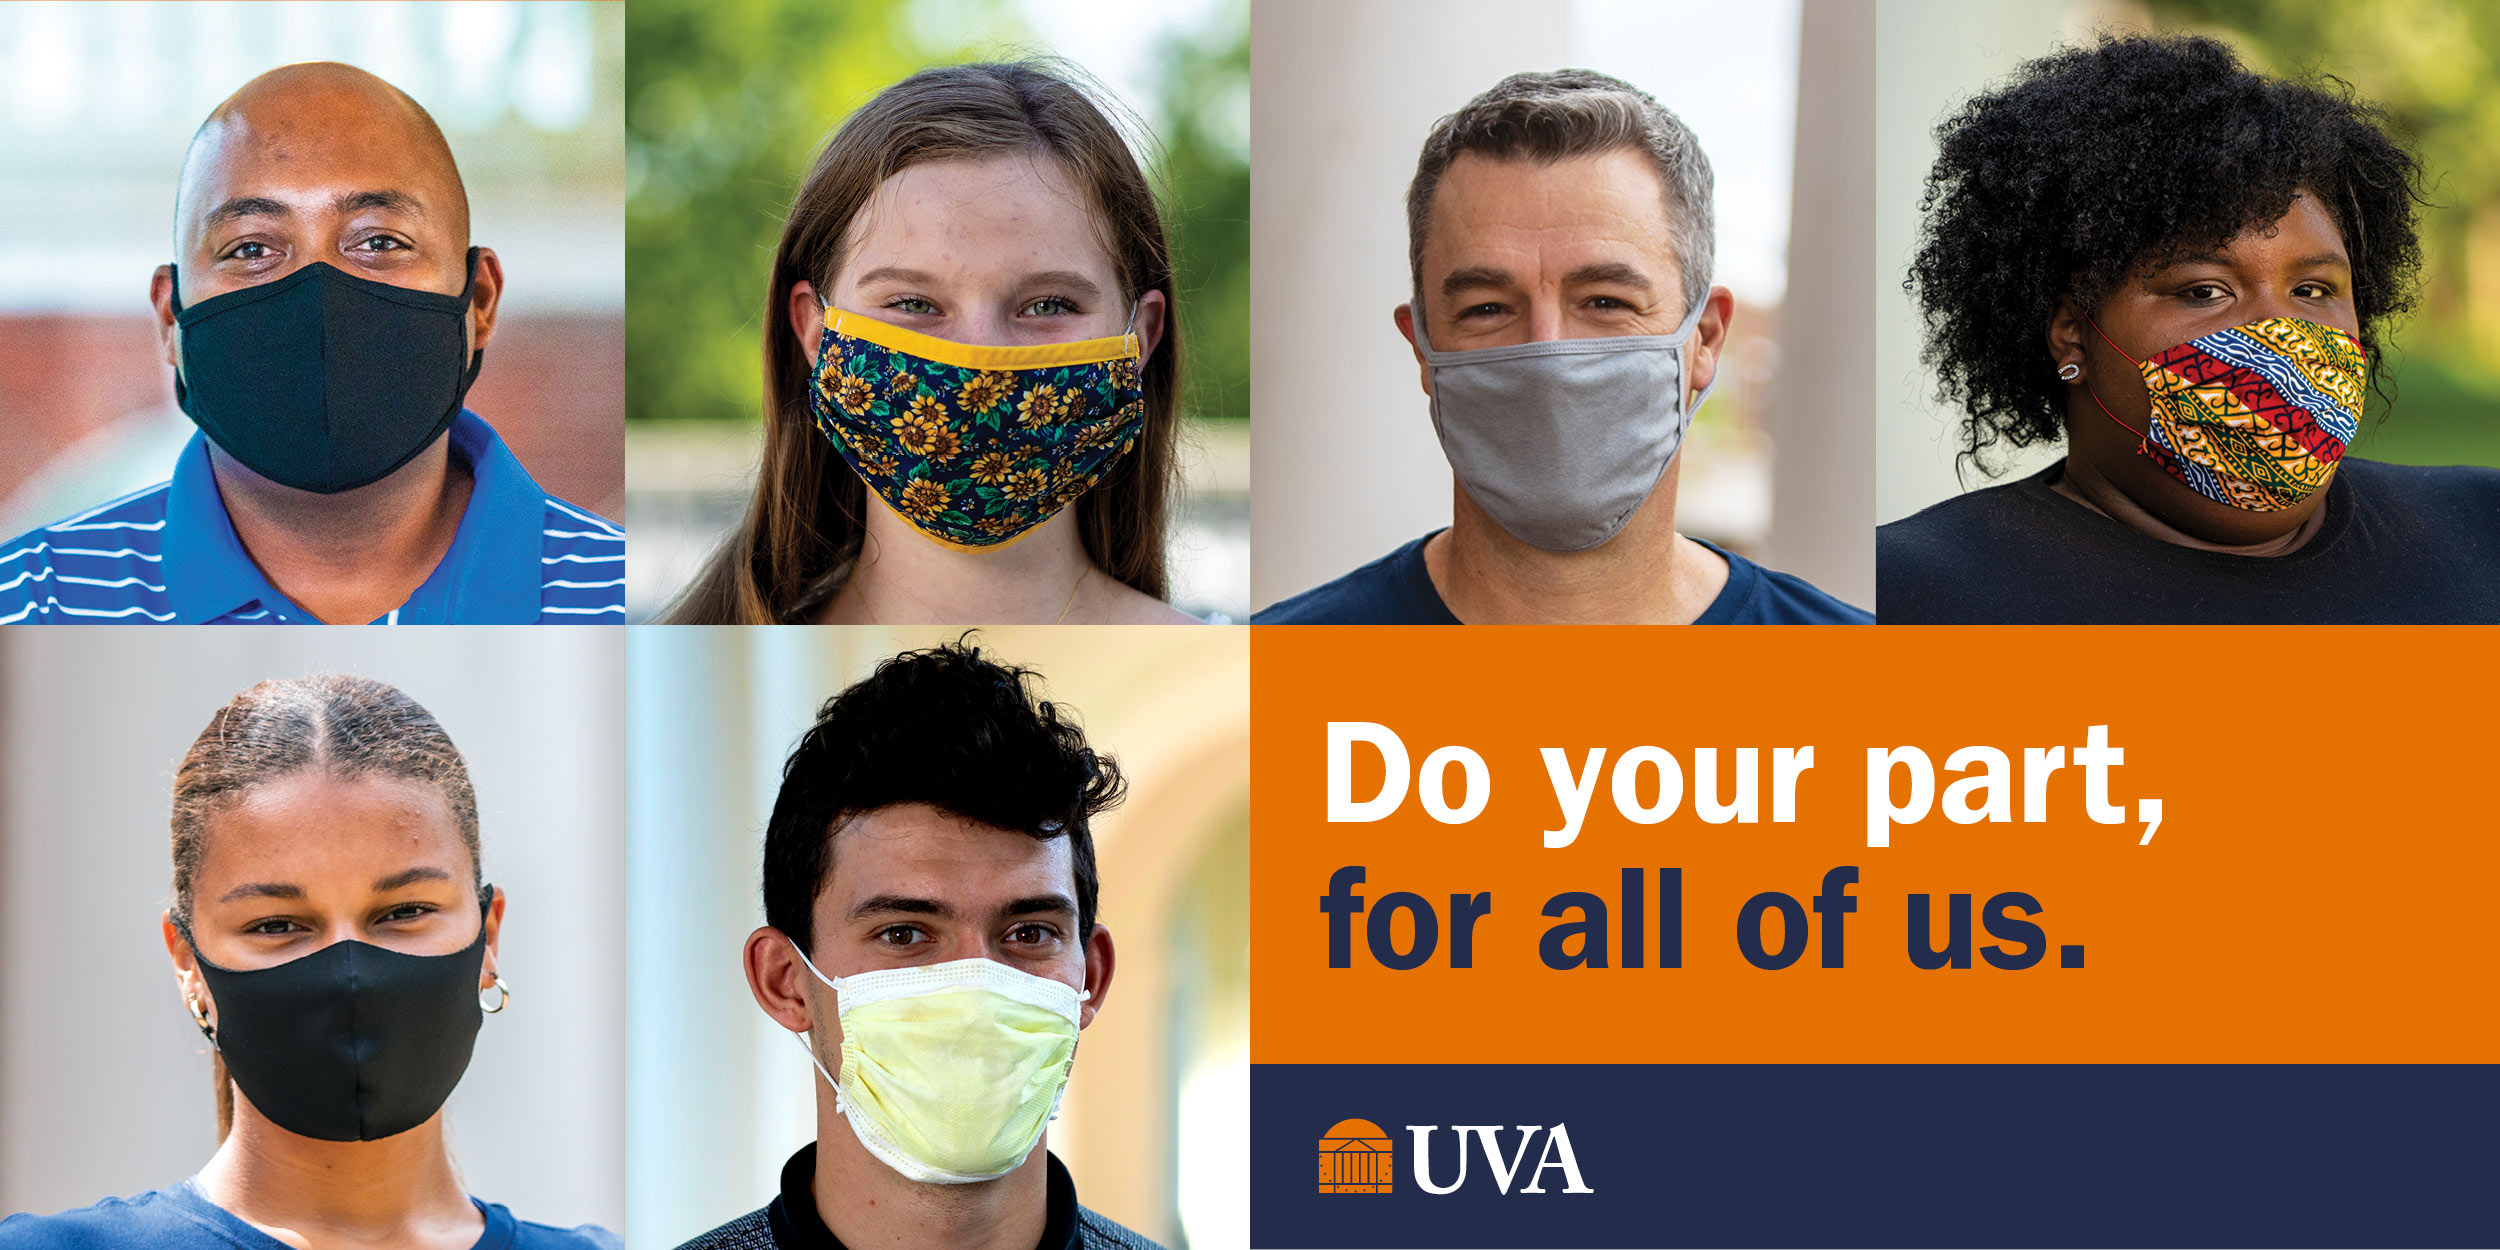 Do your part, for all of us. UVA.